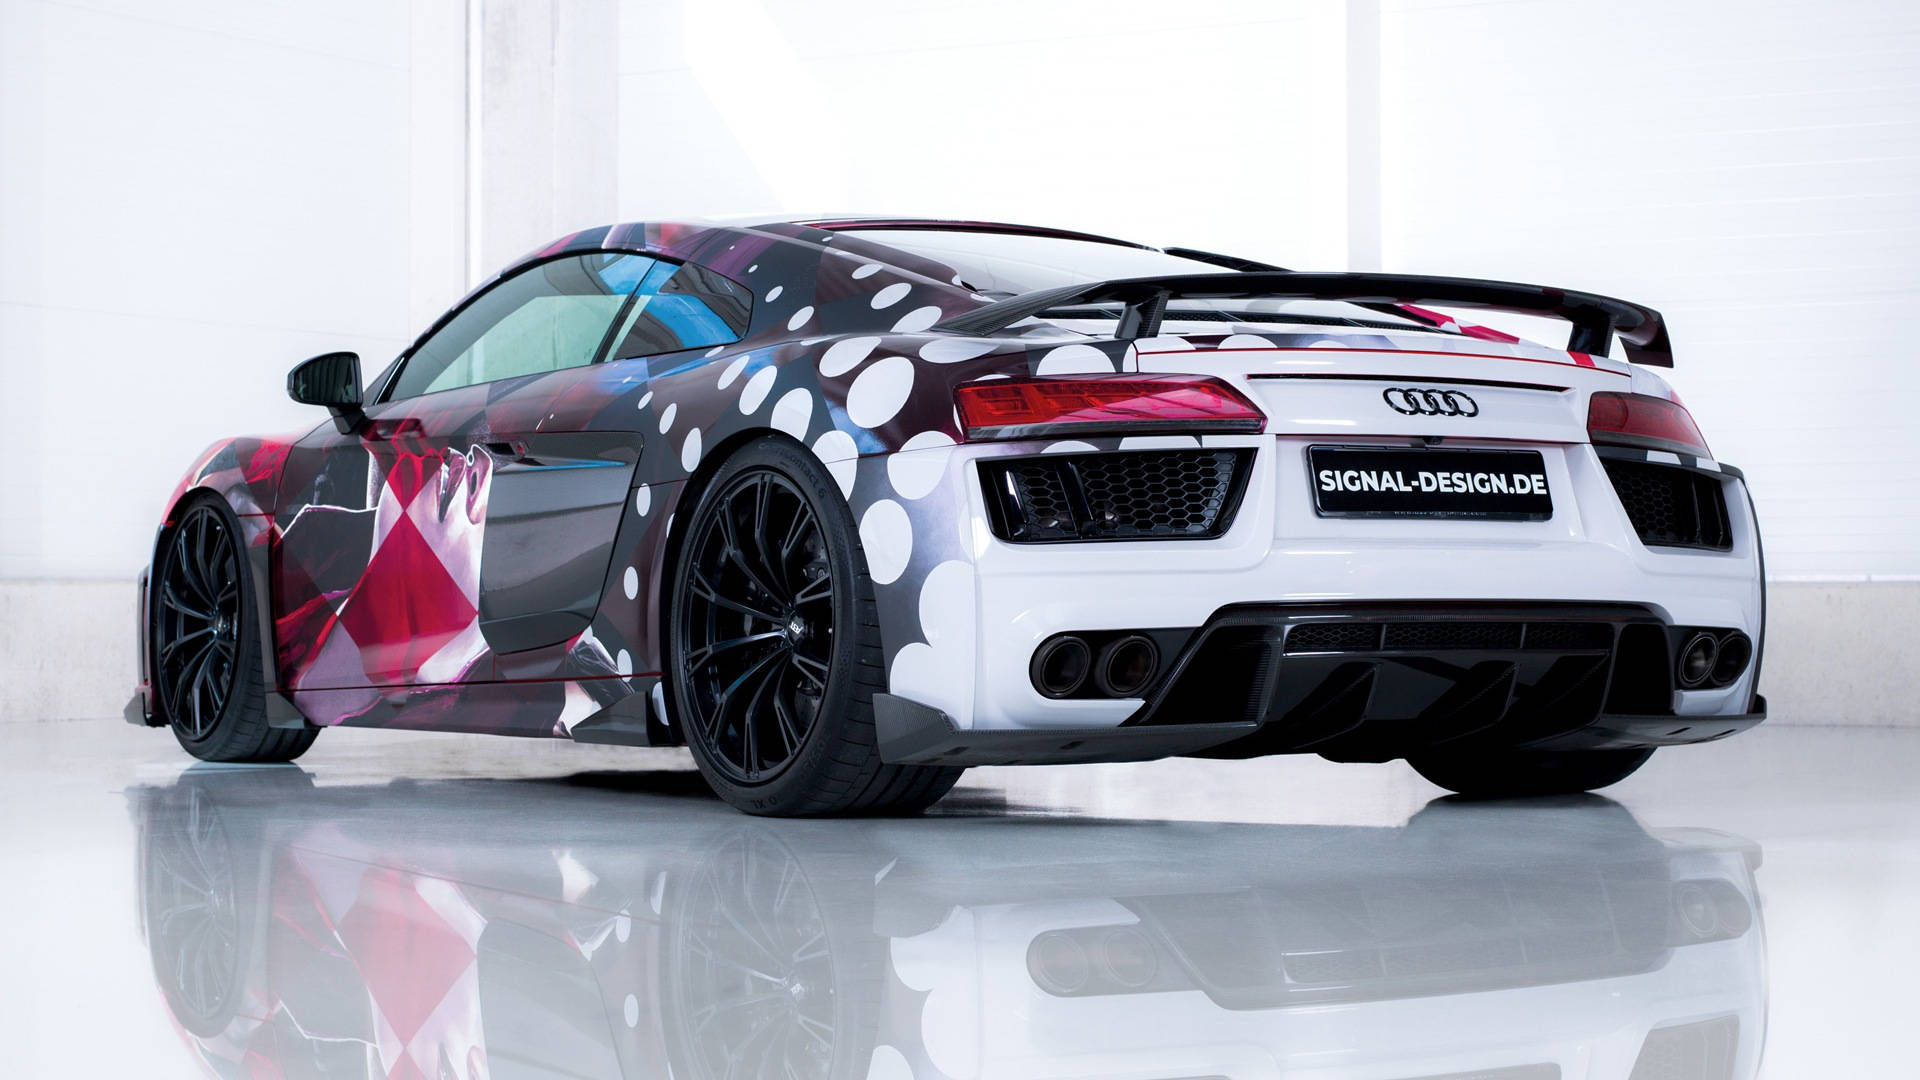 Remarkable View Of Custom-painted Audi R8 Background